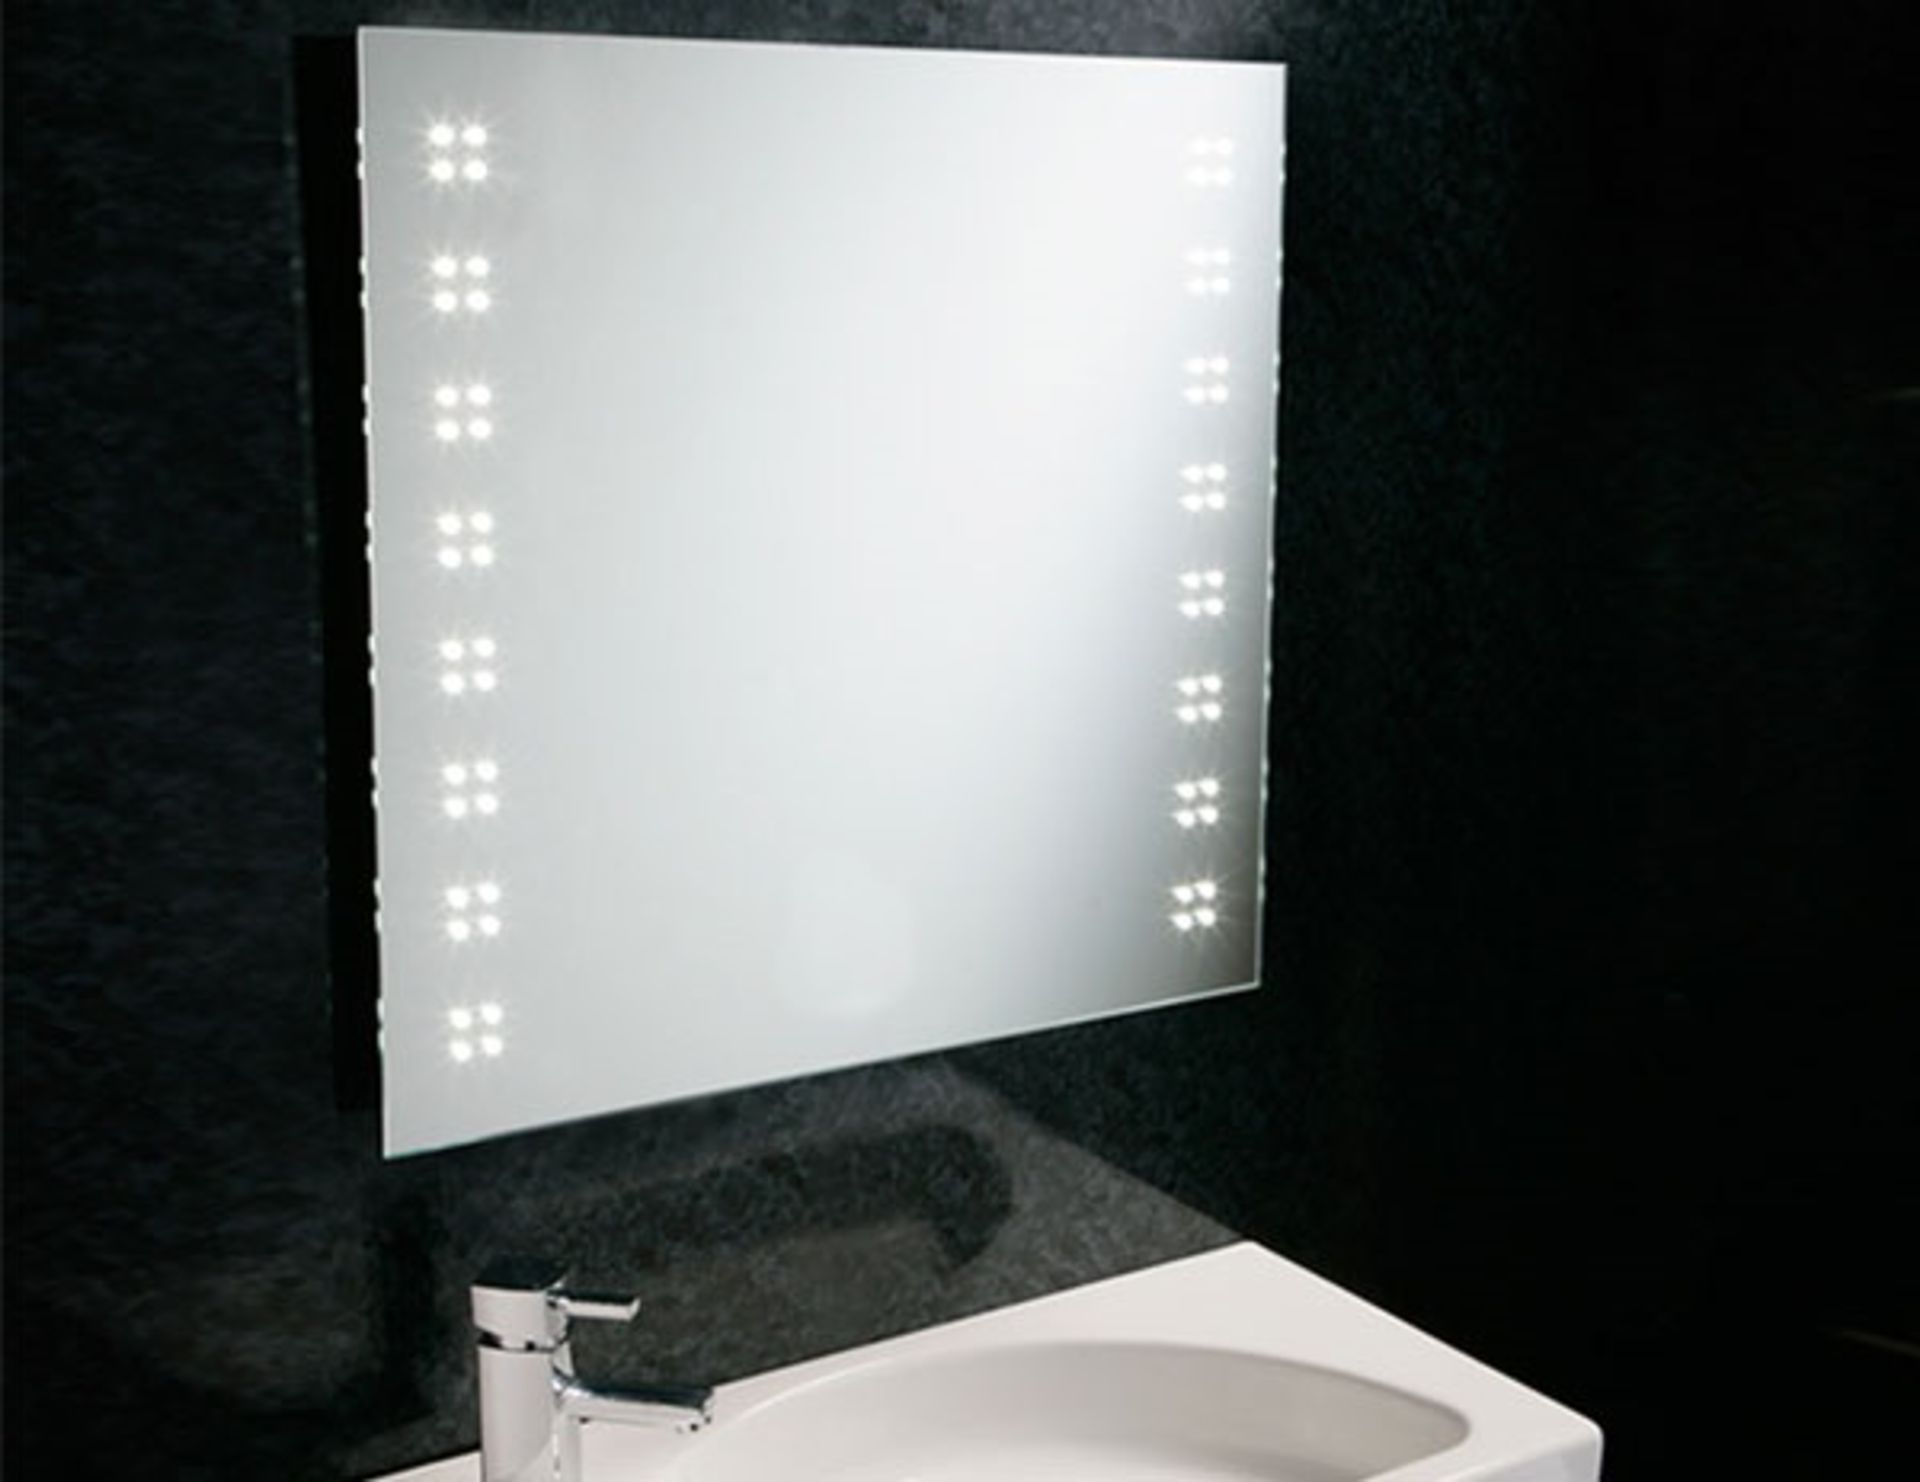 1 x Synergy MONZA LED Illuminated Bathroom Mirror With Demister & Infra-Red Switch (SY-IF-8-NC)